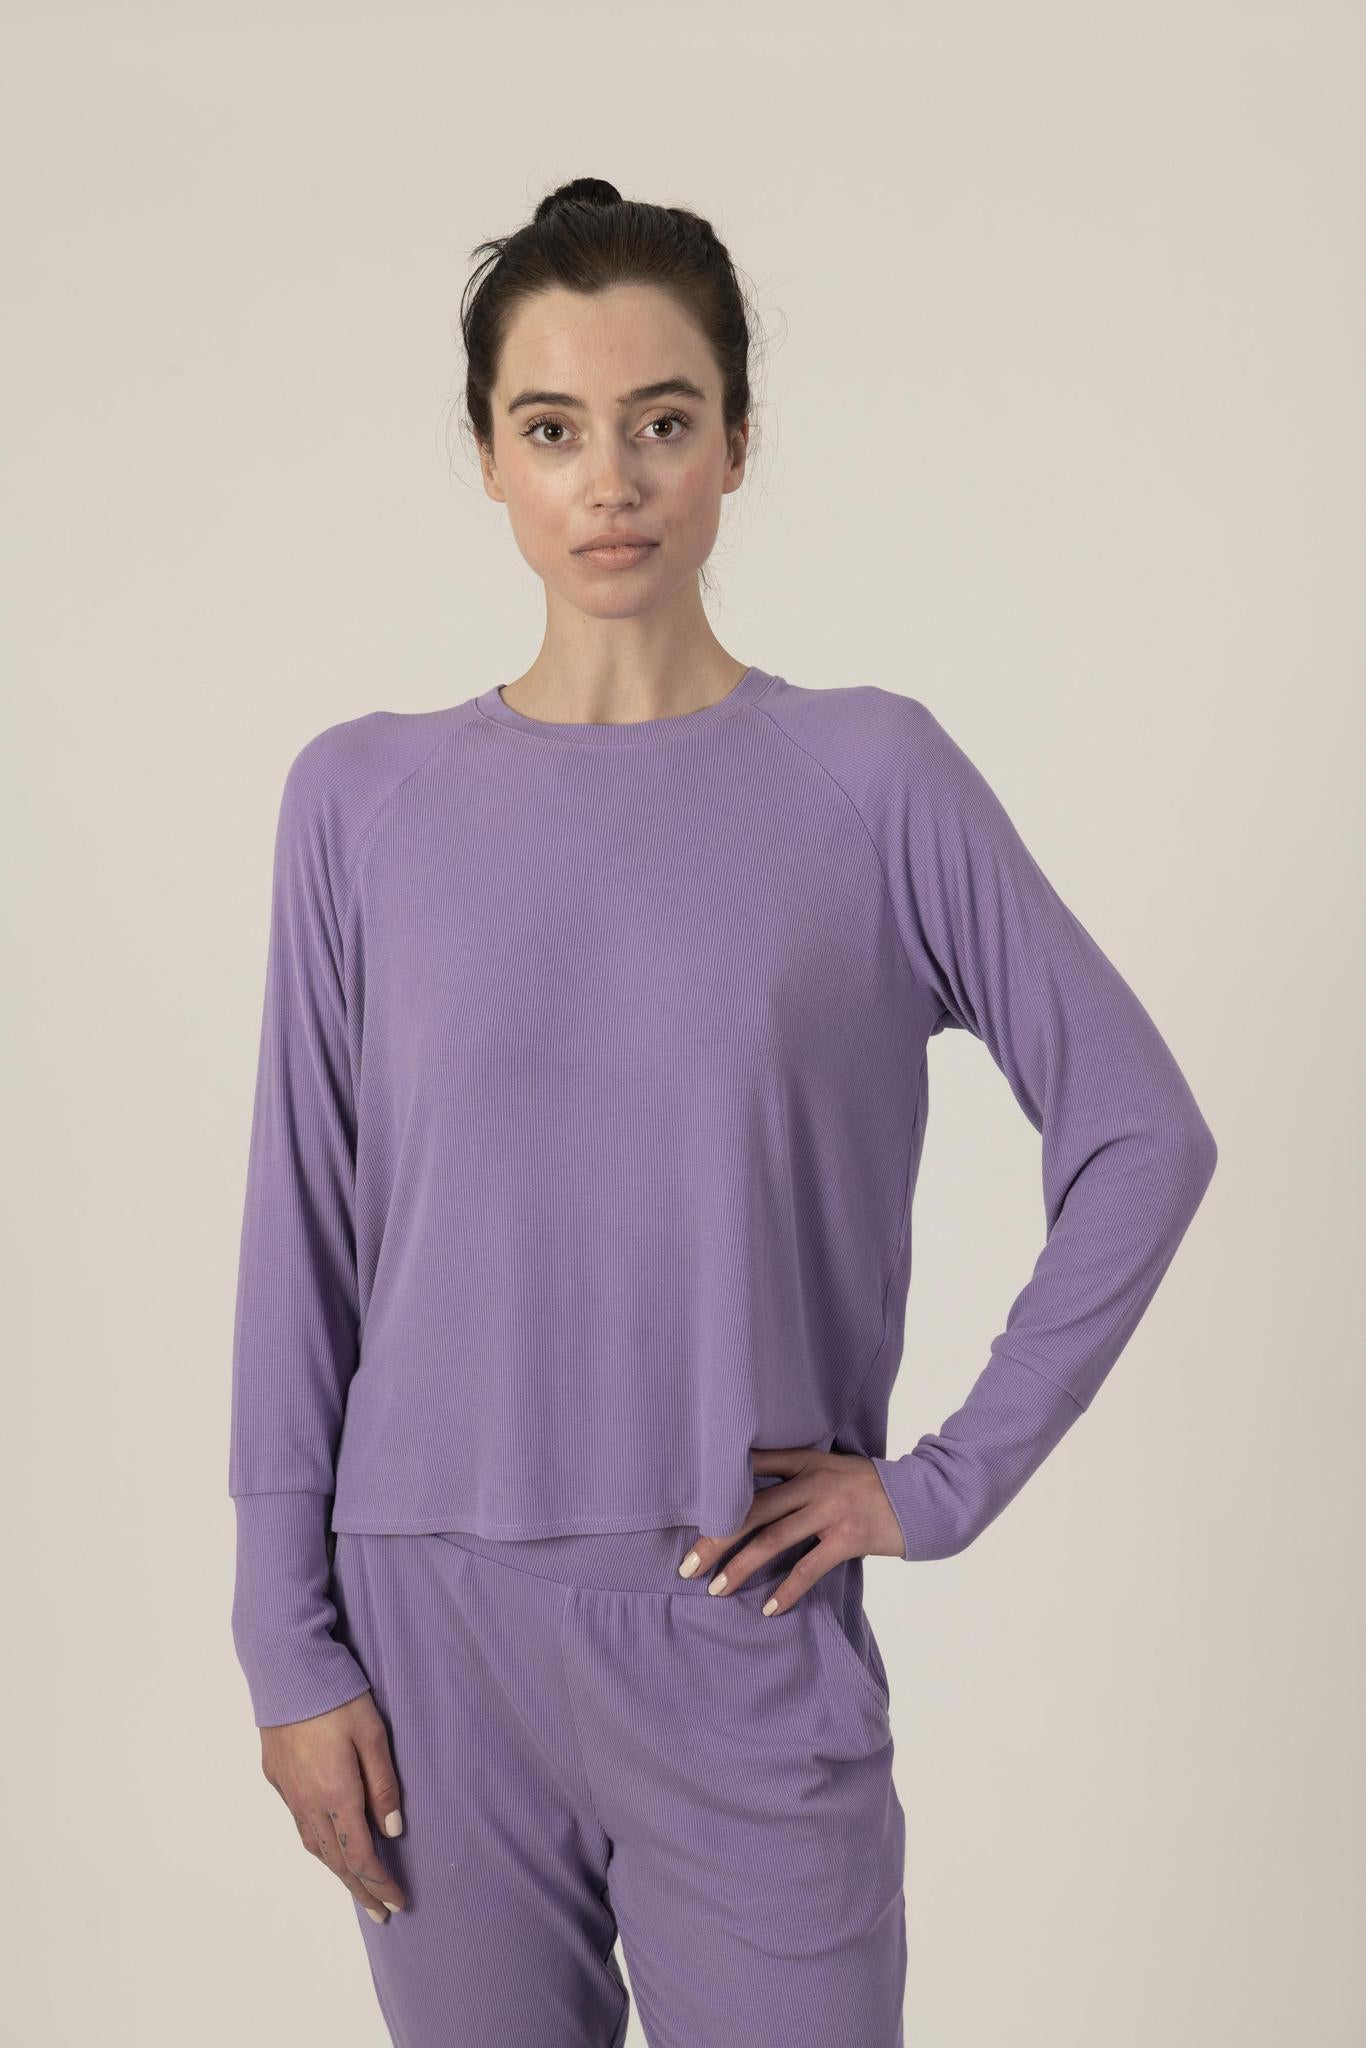 Ribbed long sleeve top in violaceous